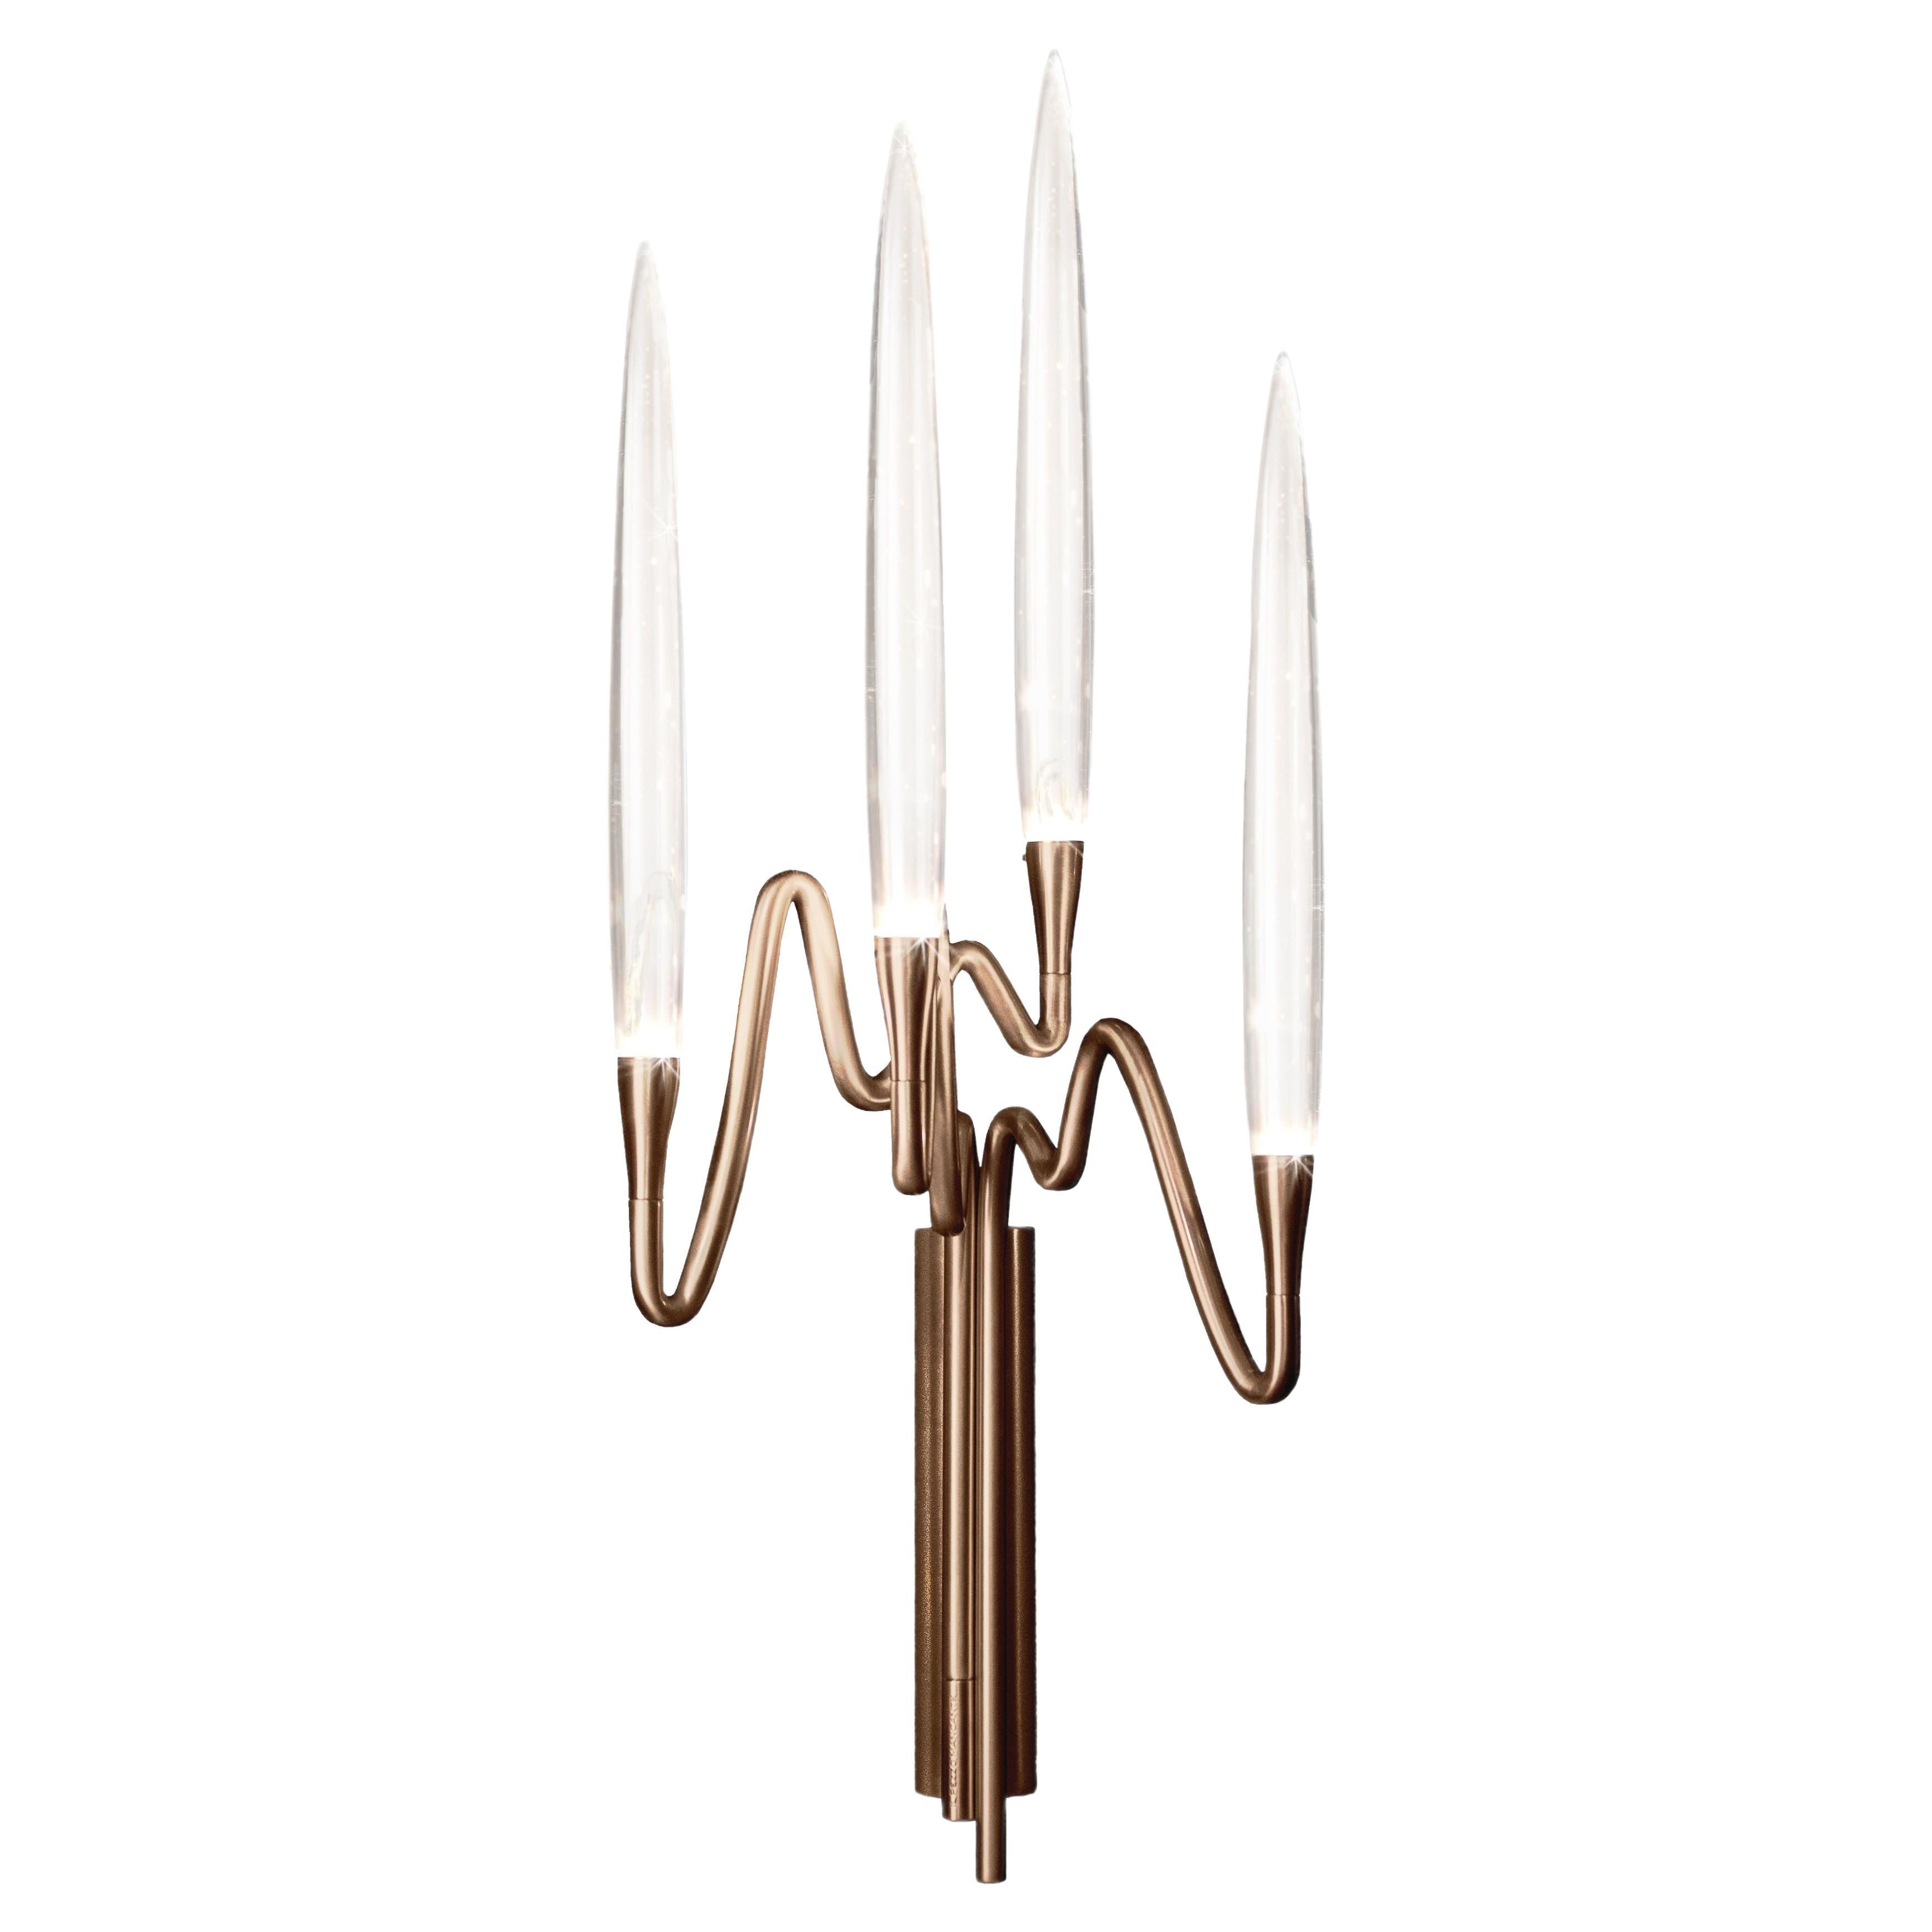 "Il Pezzo 3 Wall Sconce" - width 27cm/10.3" - bronze - crystal - LEDs